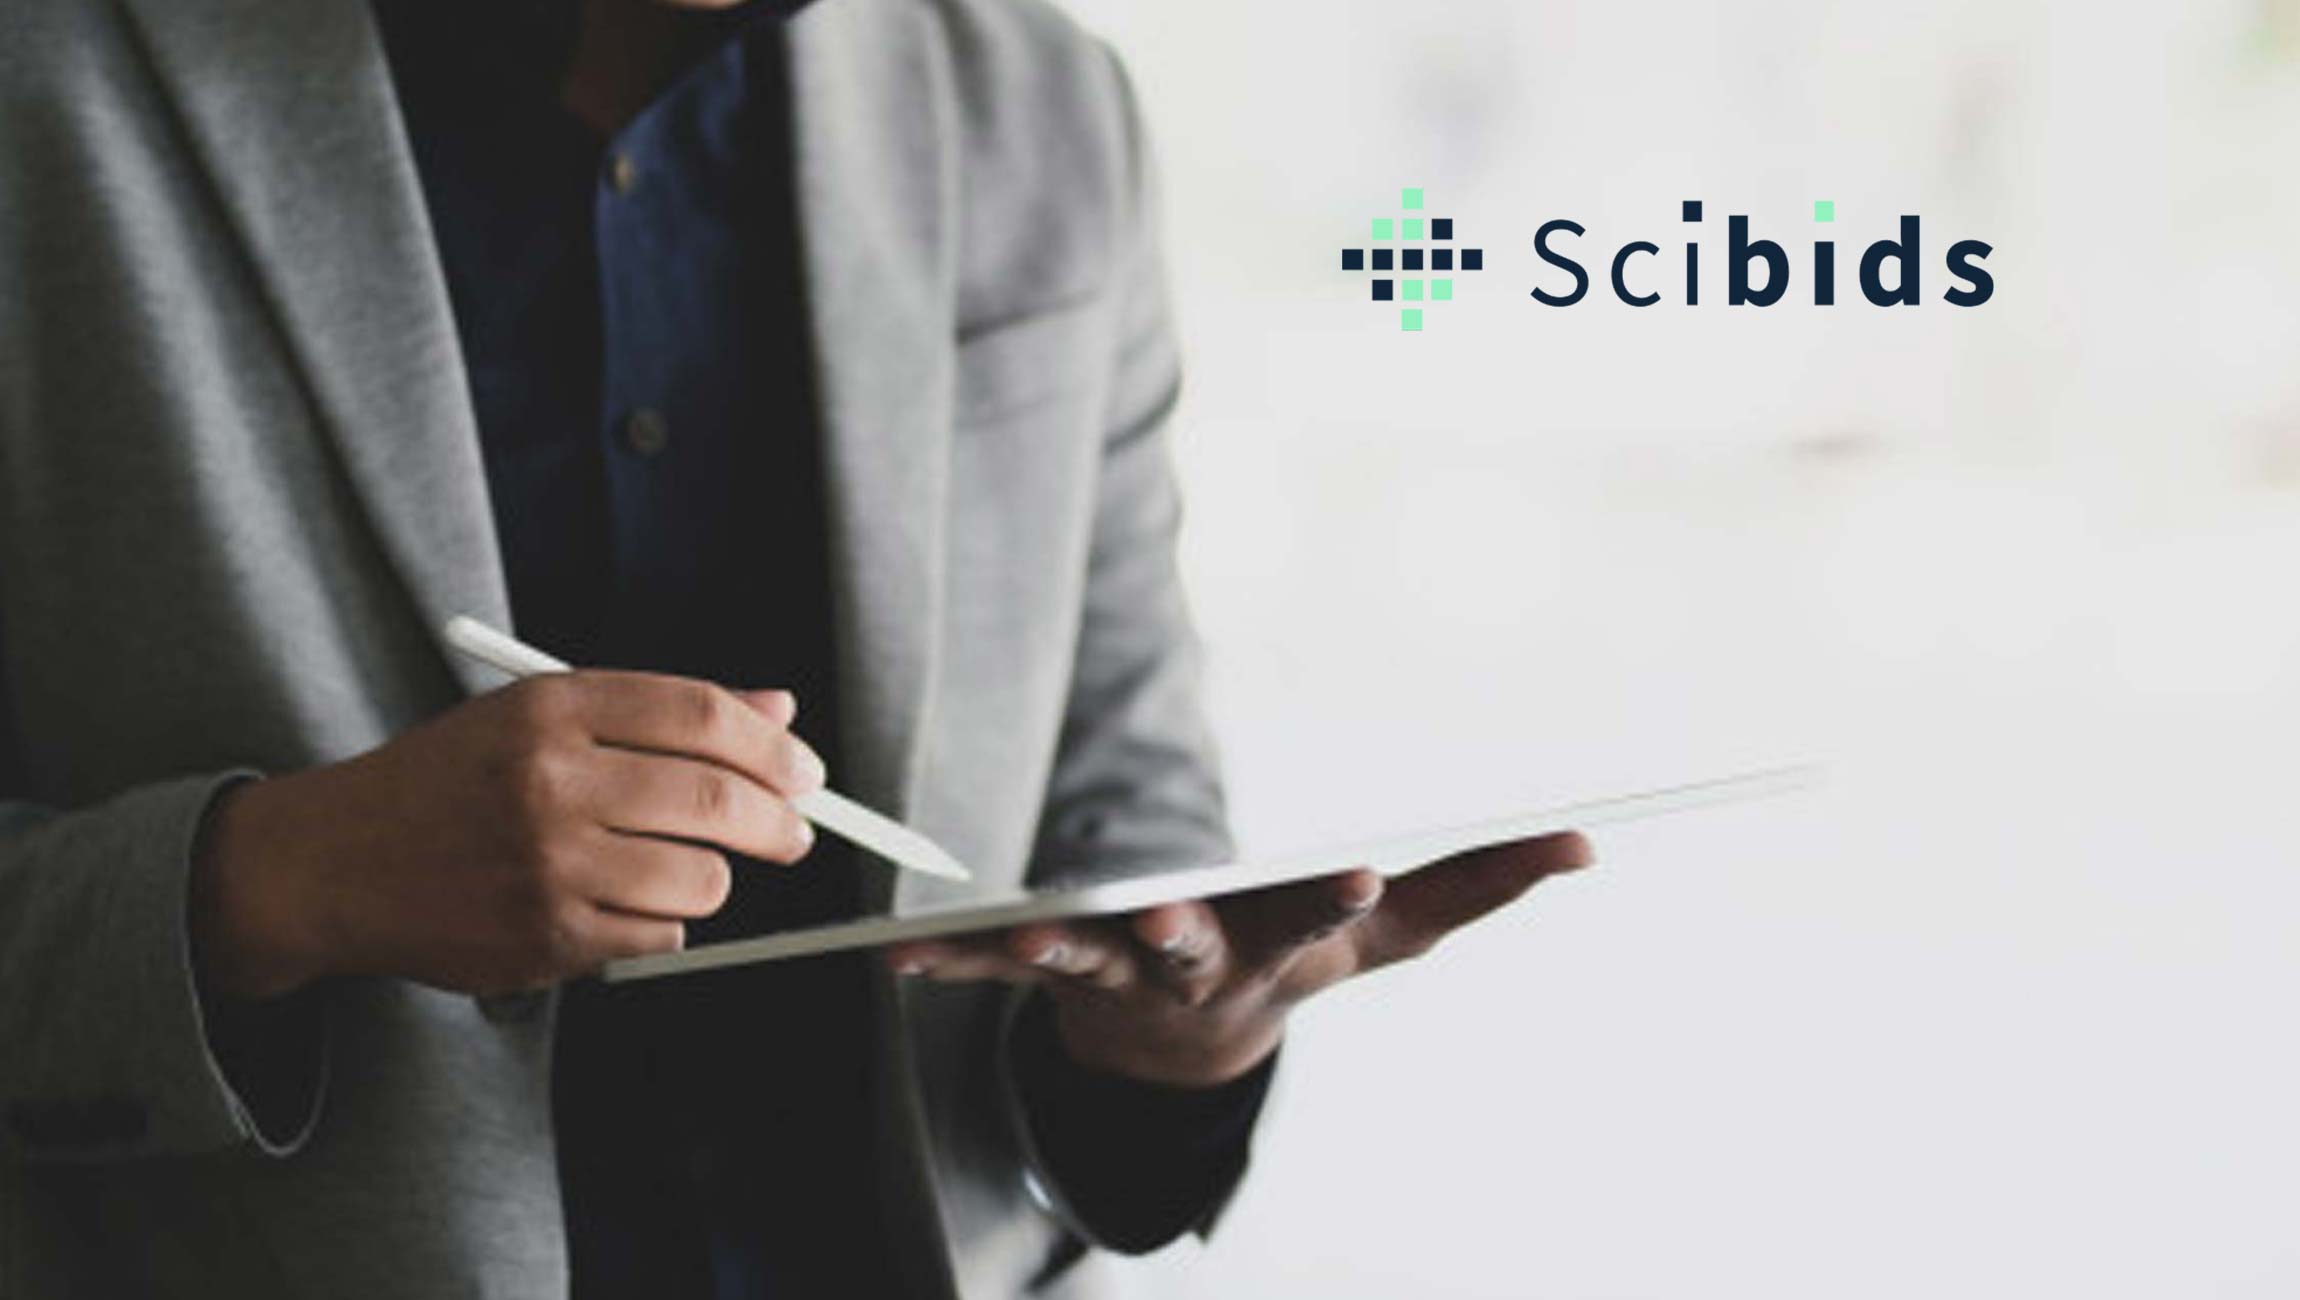 Scibids - Artificial Intelligence for Marketing